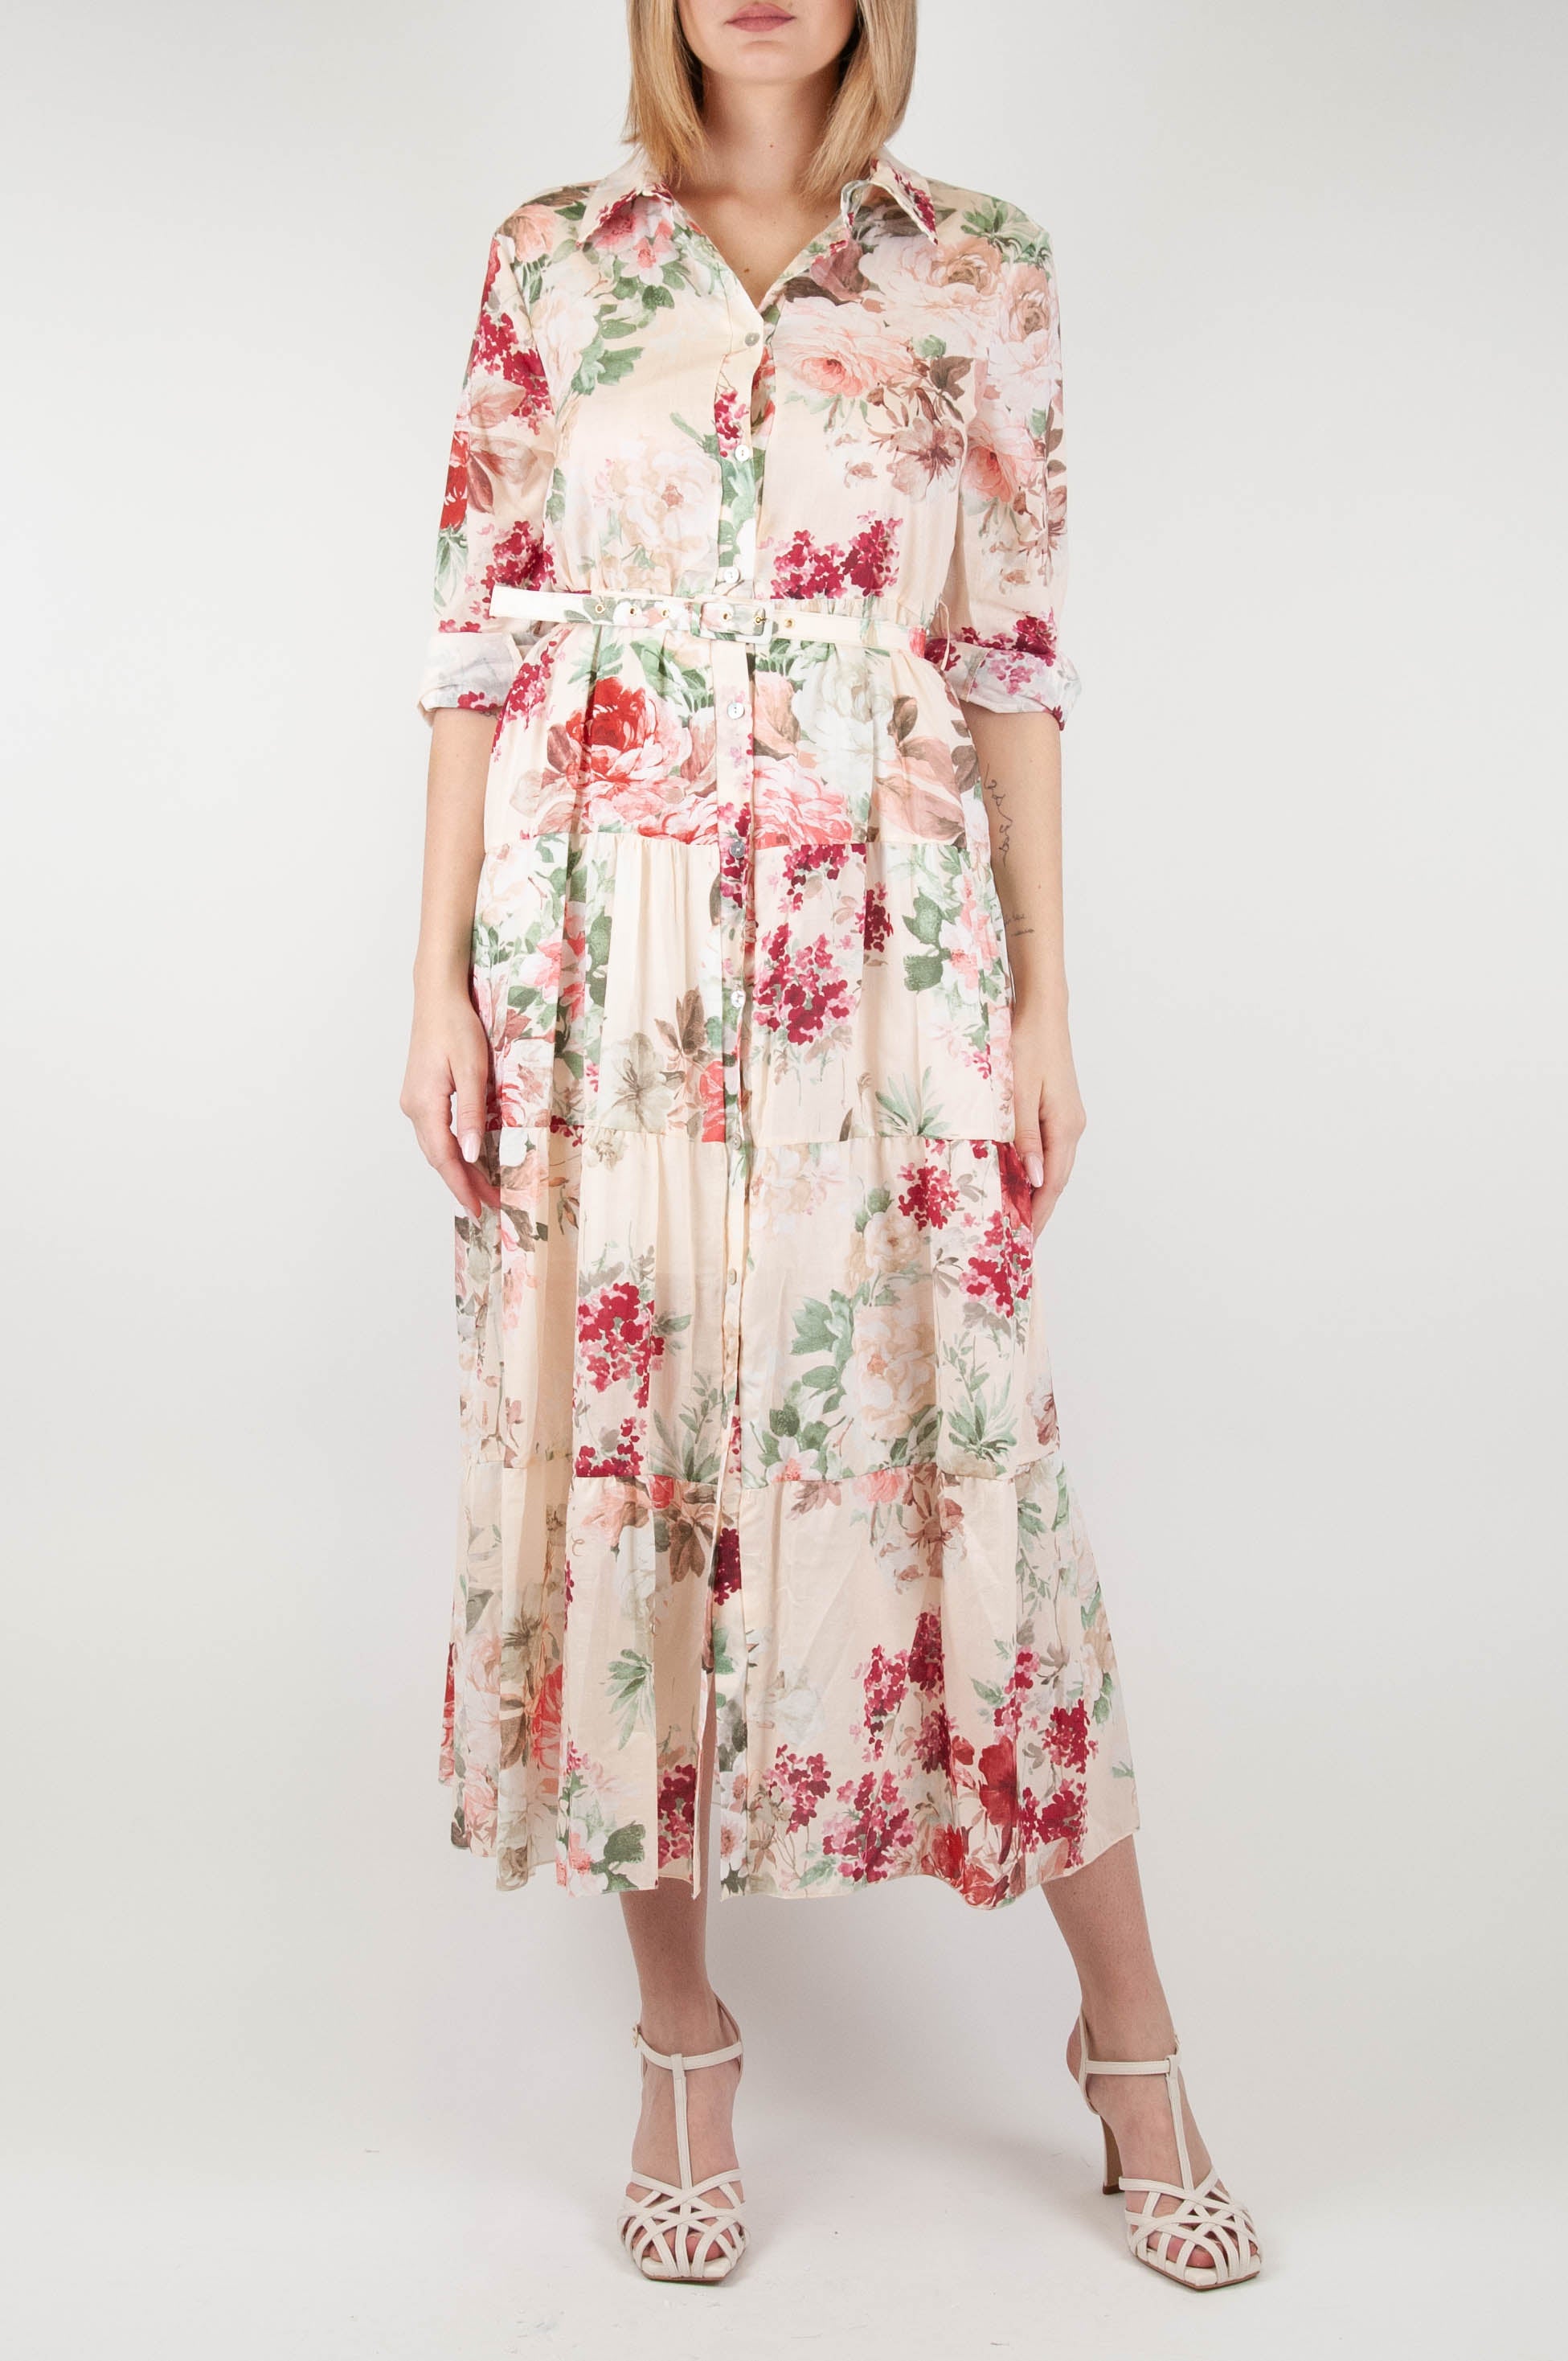 Tension in - Floral patterned shirtdress in cotton muslin with flounces